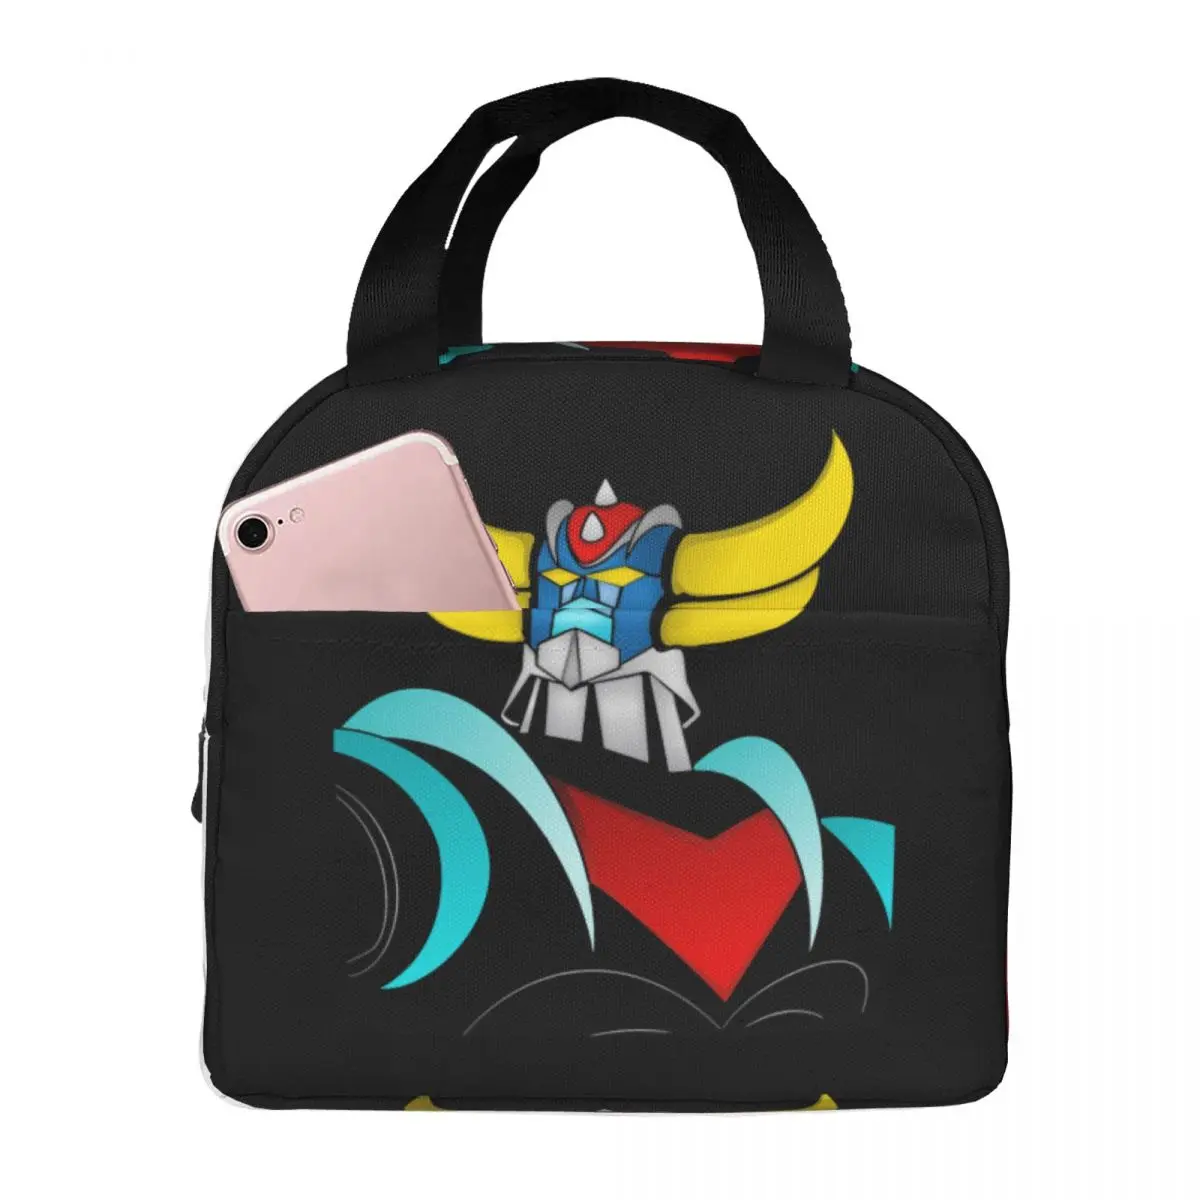 Grendizer Goldorak Lunch Bags Portable Insulated Cooler Mazinger Z Anime Robot Thermal Cold Food School Lunch Box for Women Girl